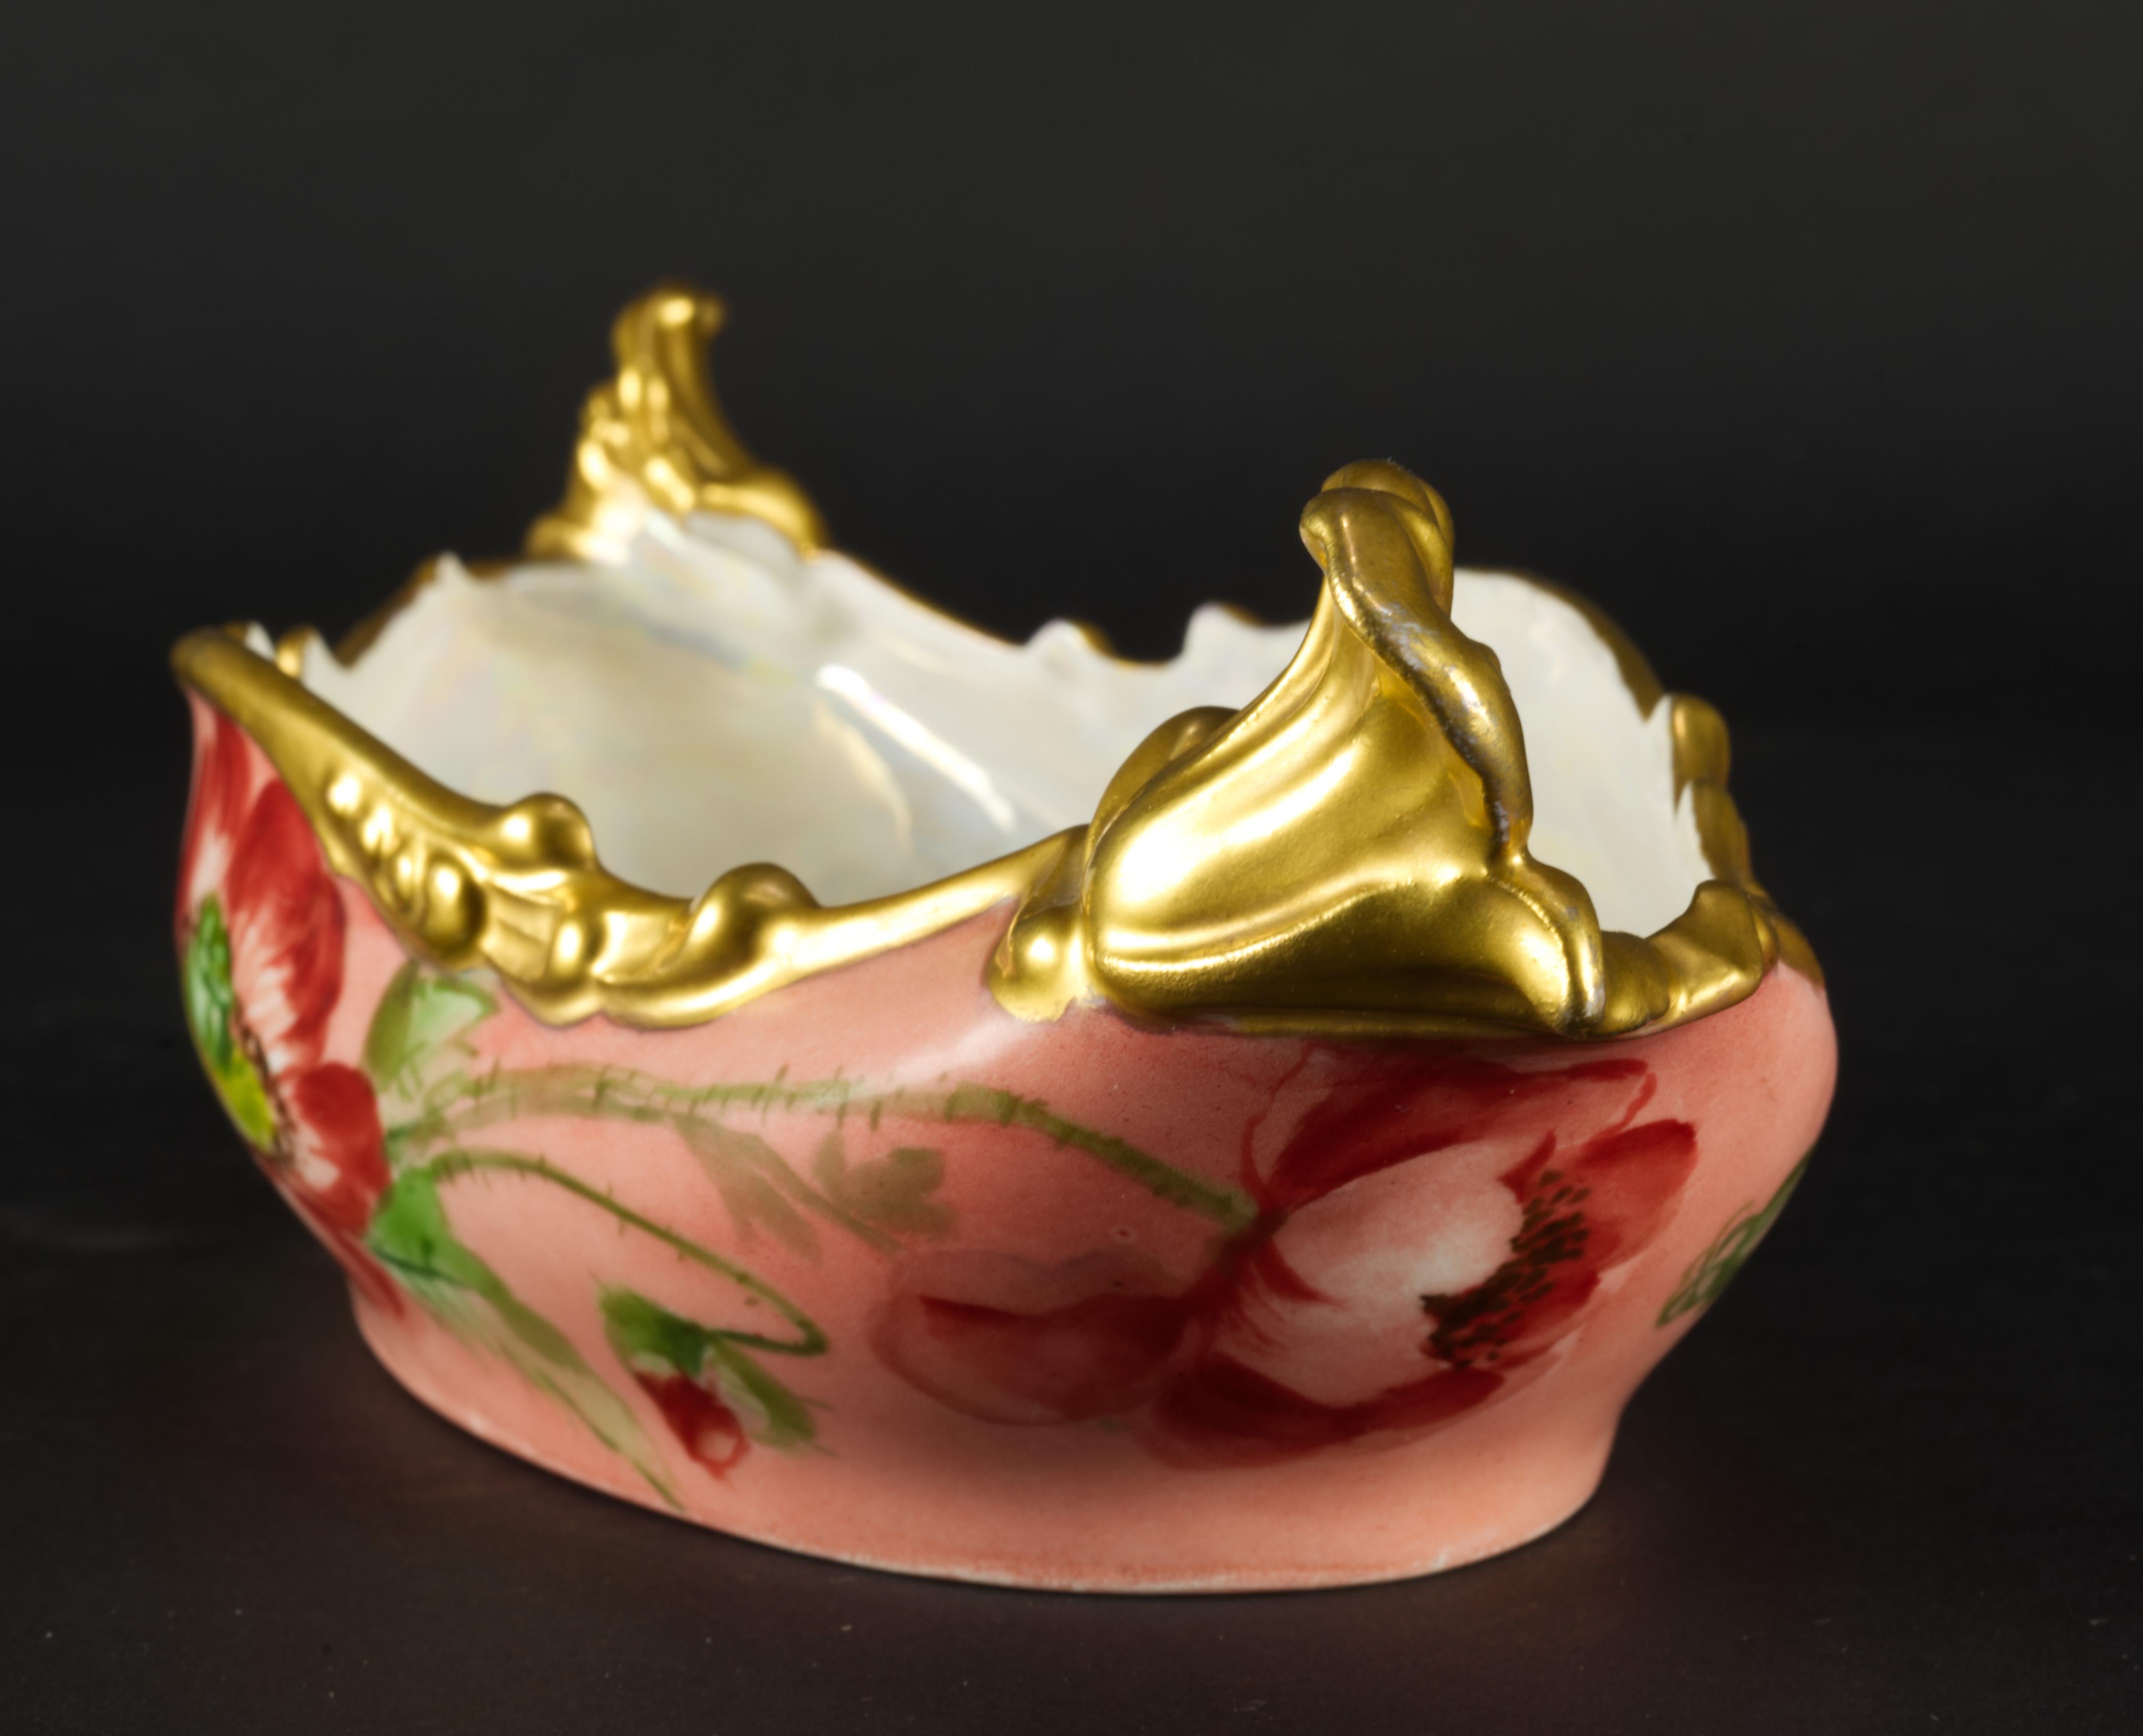 Rare Jean Pouyat Limoges France Oval Hand-painted Porcelain Ravier Bowl, 1926 For Sale 4